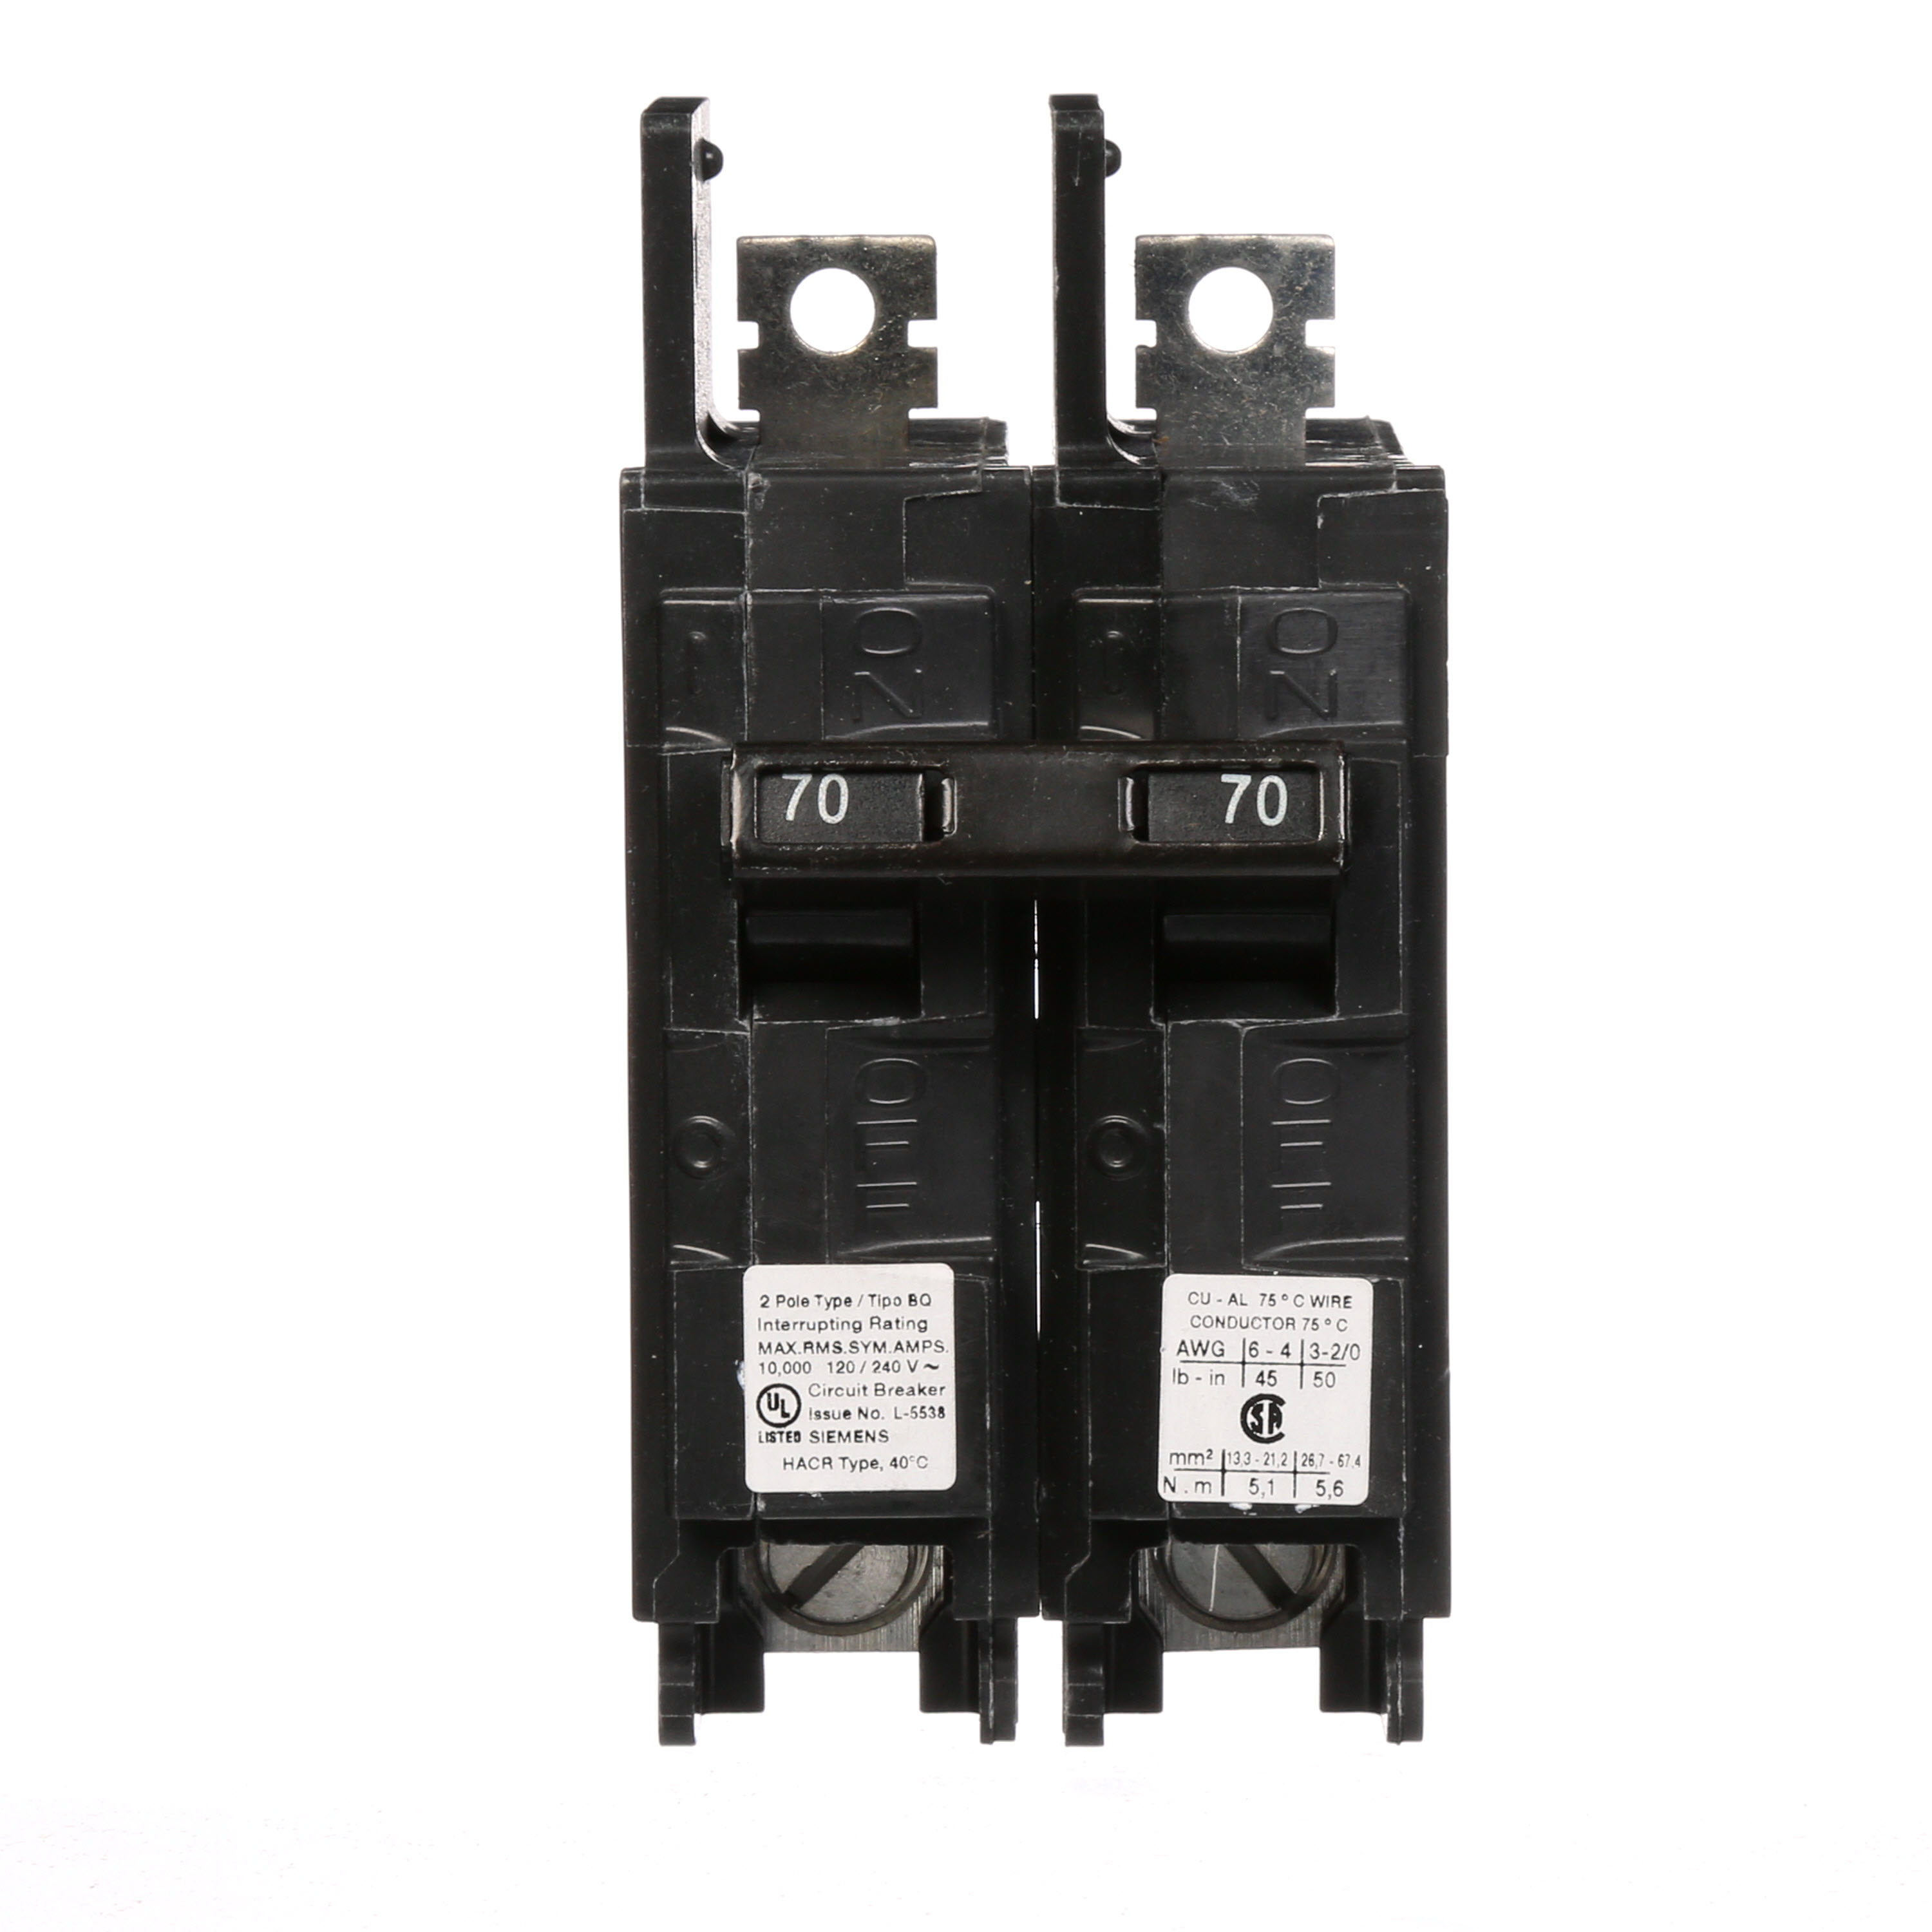 Siemens Low Voltage Molded Case Circuit Breakers General Purpose MCCBs - Type BQ, 2-Pole, 120/240VAC are Circuit Protection Molded Case Circuit Breakers. 2-Pole Common-Trip circuit breaker type BQ. Rated 120/240V (070A) (AIR 10 kA). Special features Load side lugs are included.